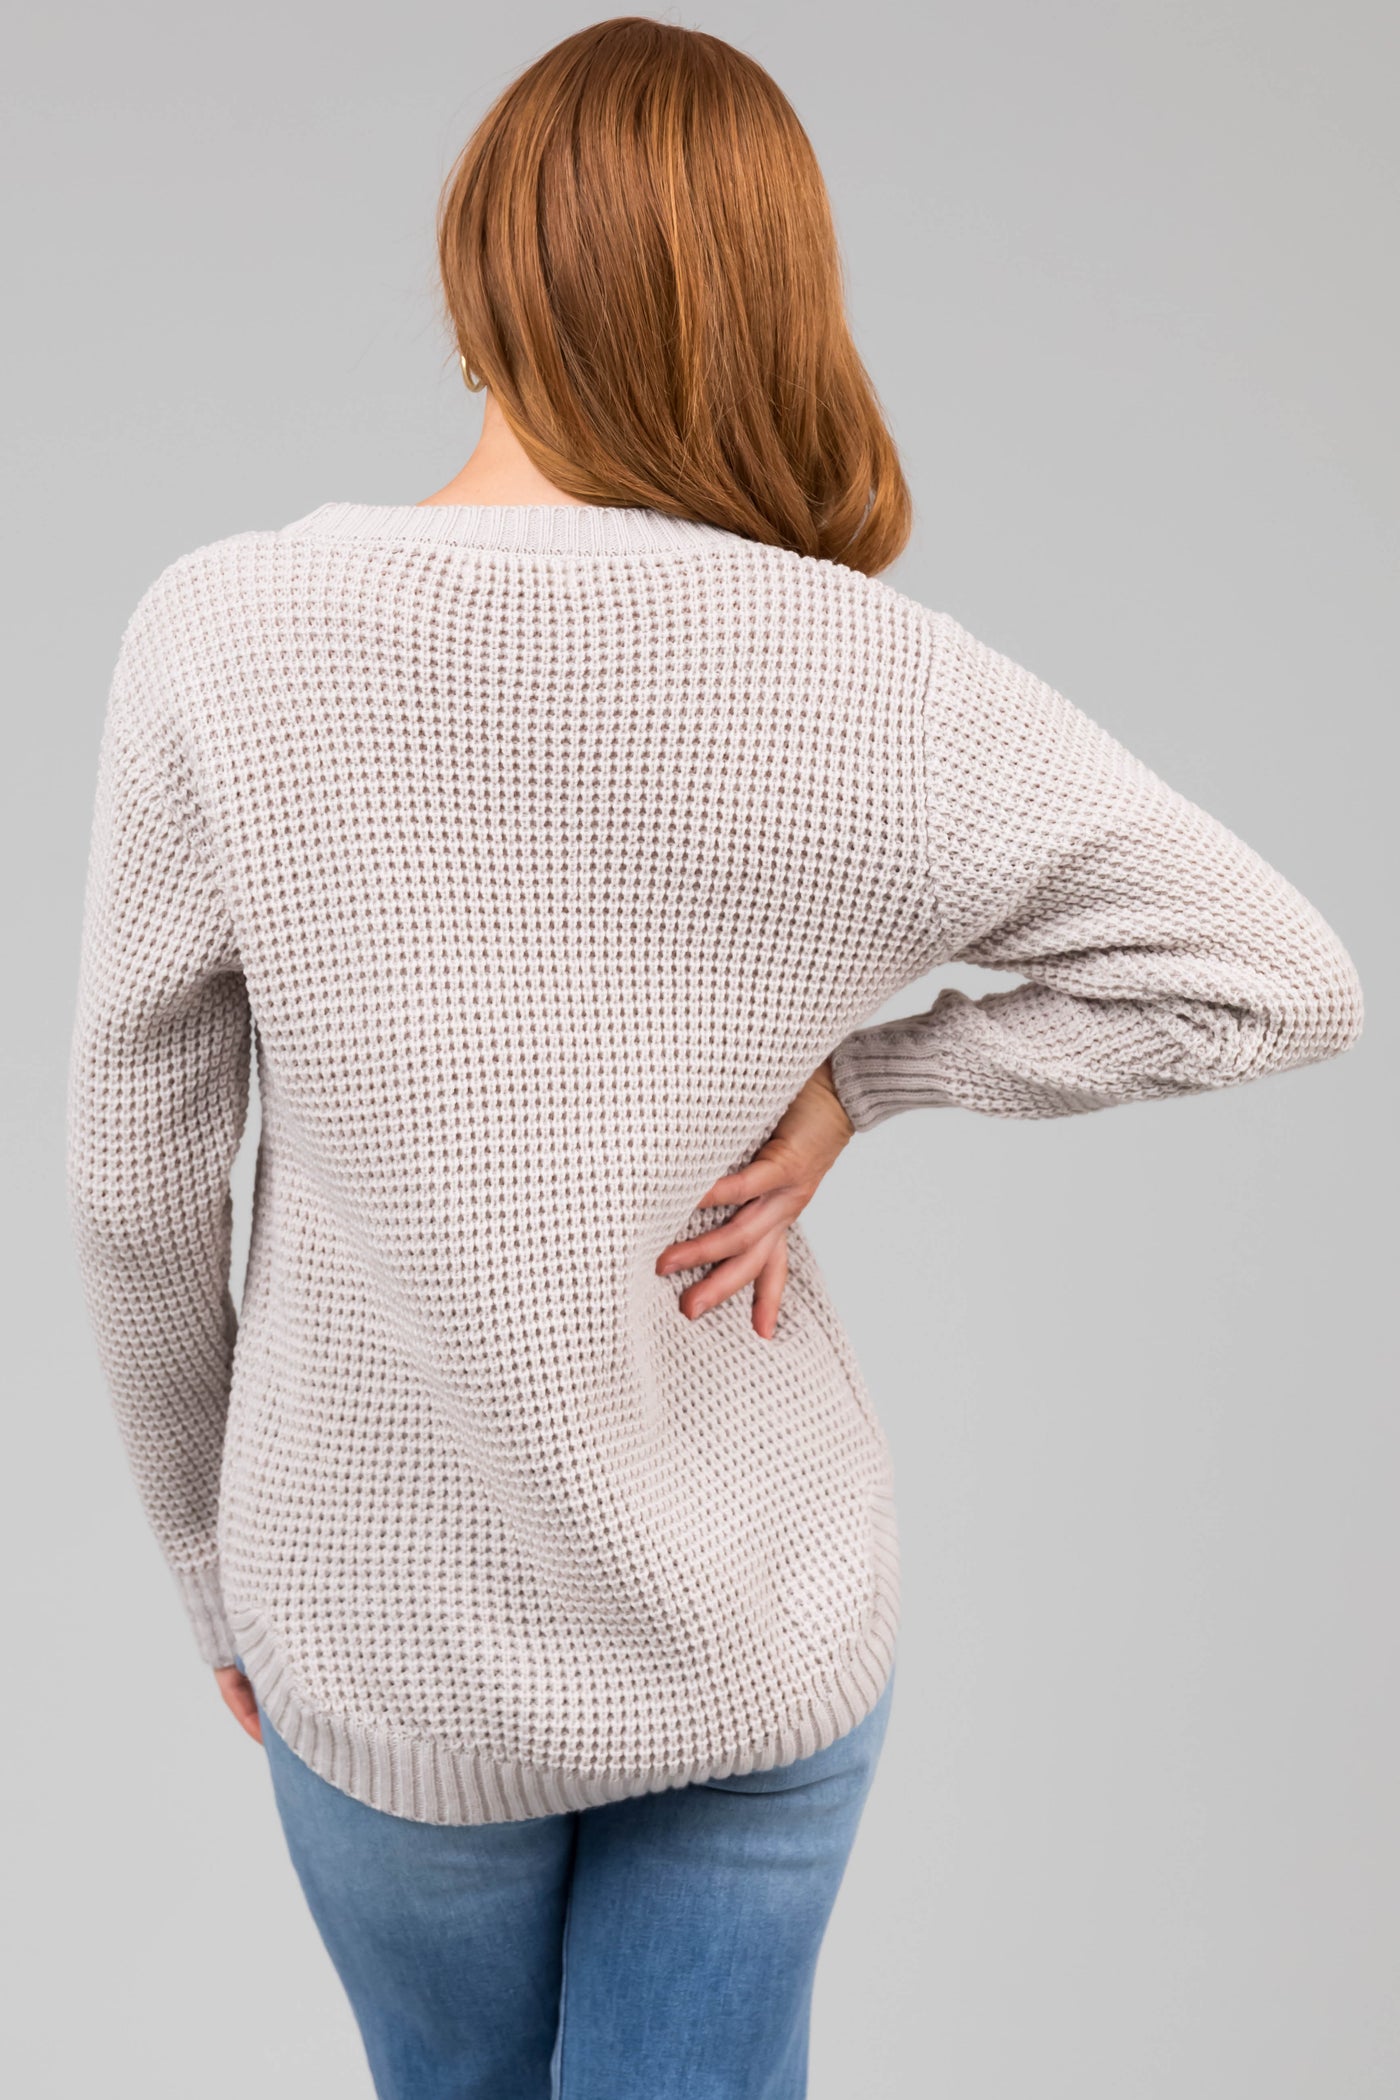 Cloud Grey Thick Waffle Knit Curved Hem Sweater